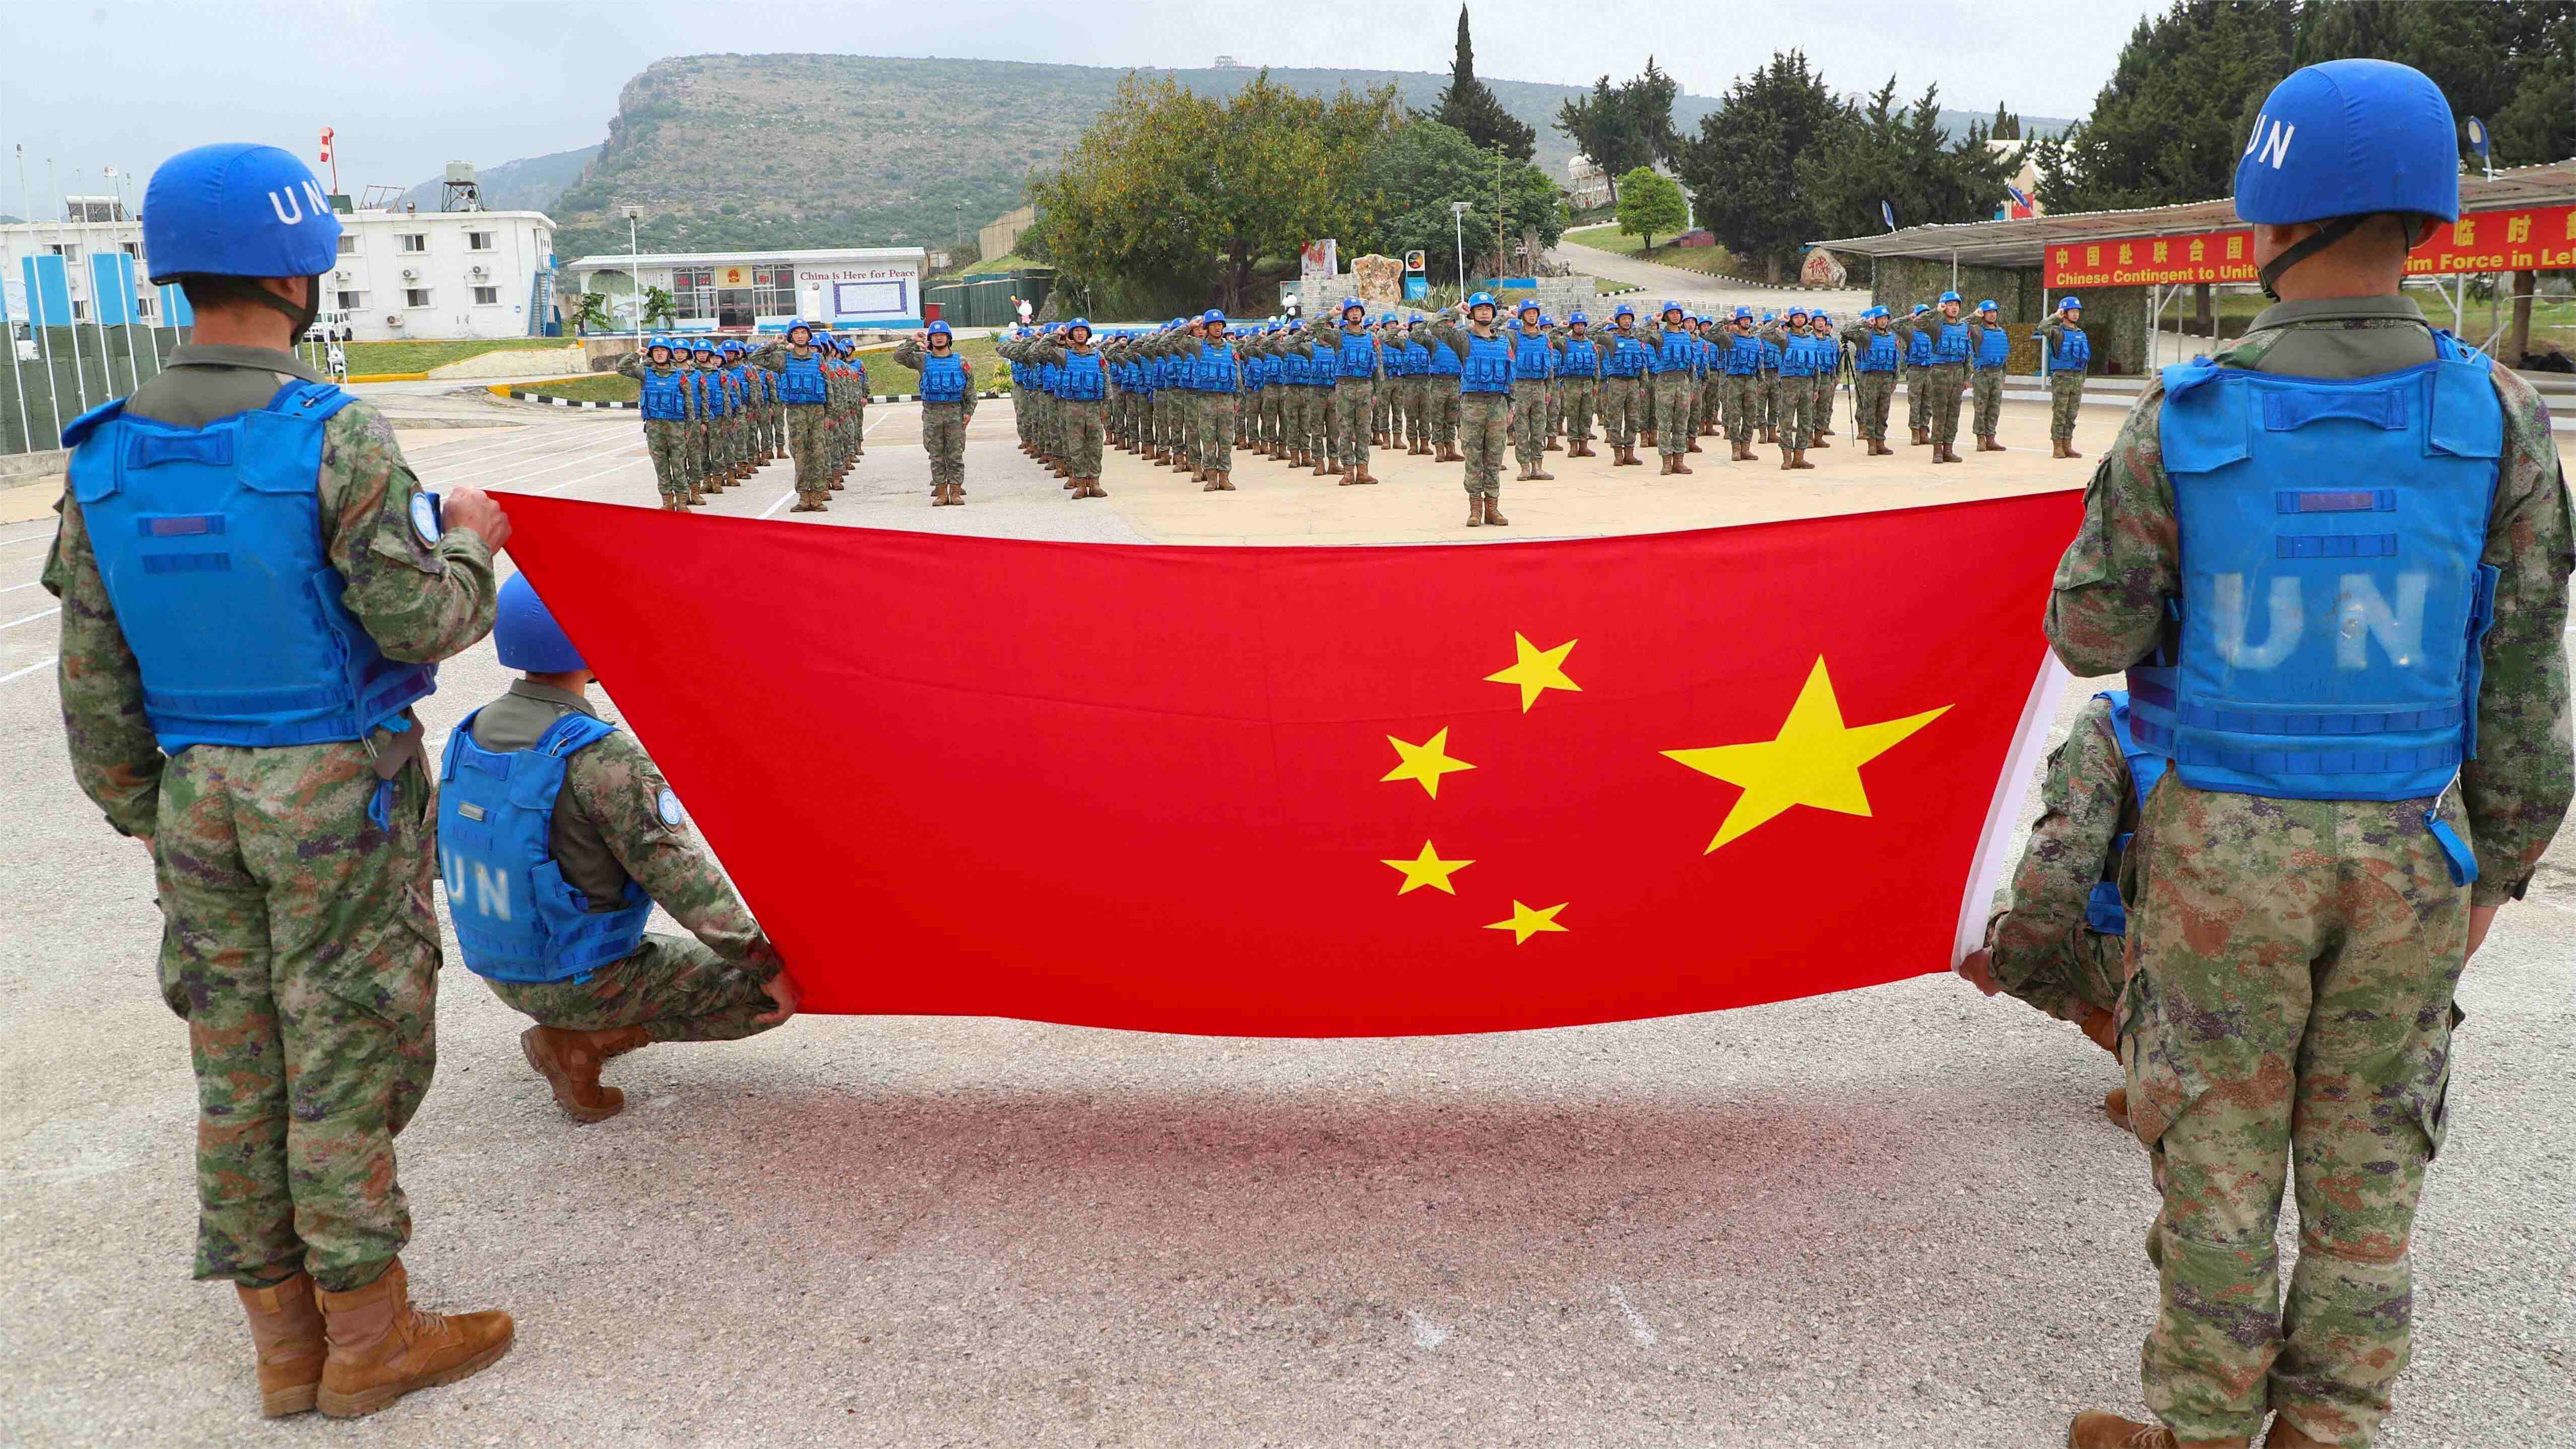 Chinese peacekeepers to Lebanon celebrate China's Youth Day